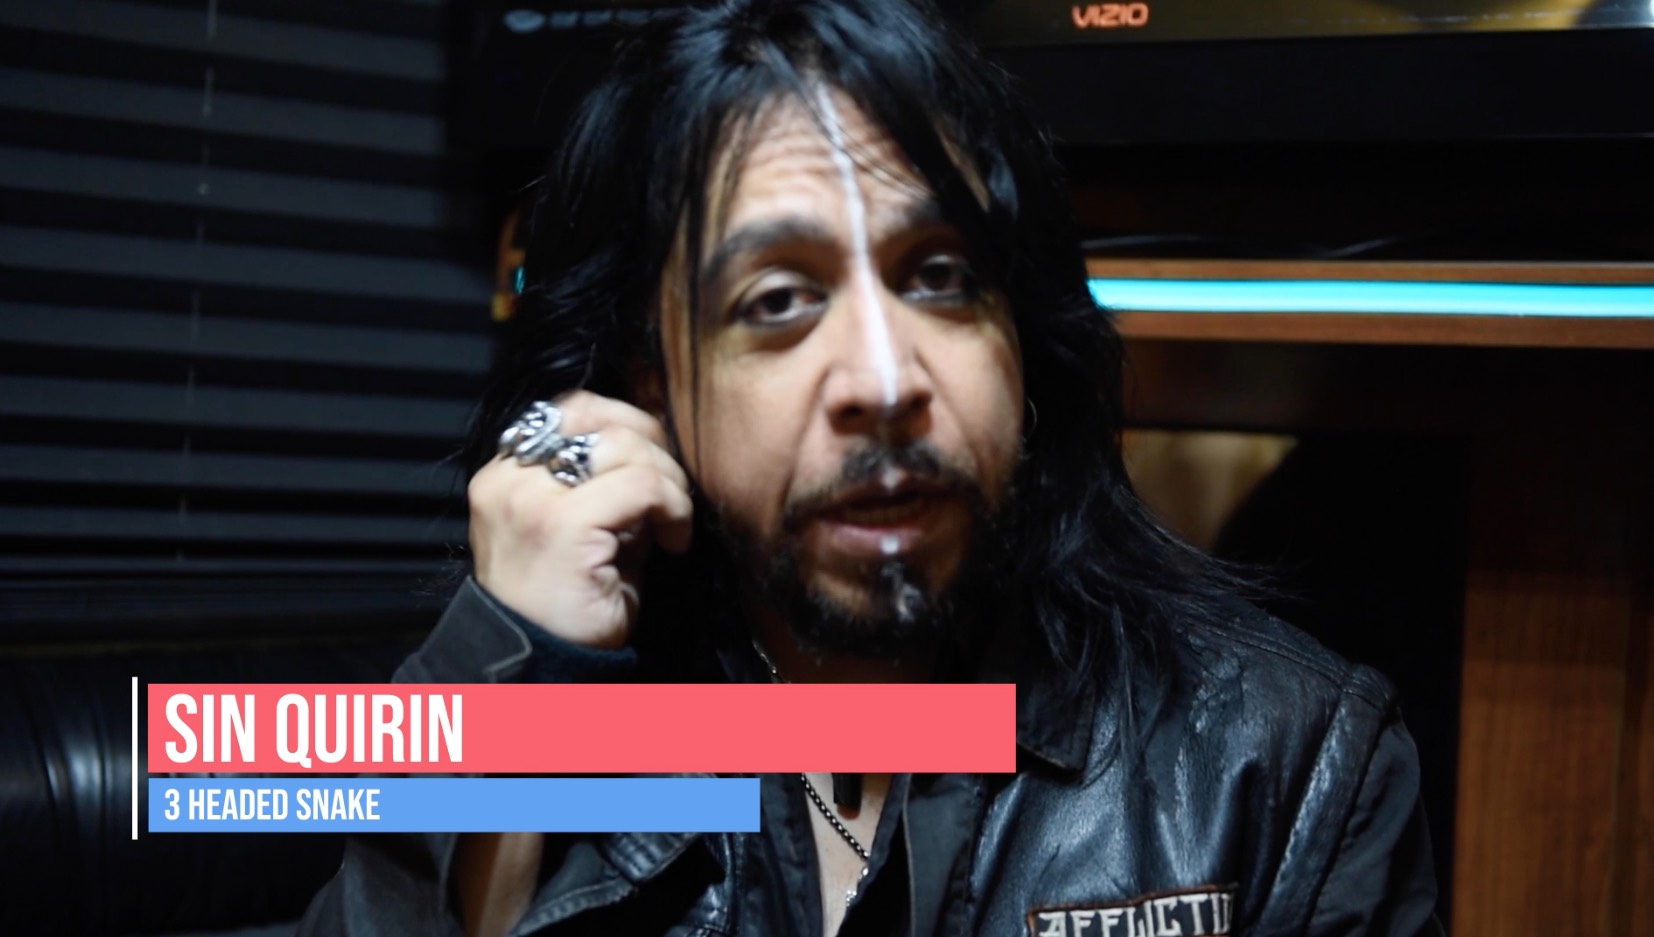 ITLM Exclusive! Interview: Sin Quirin (Ministry / Lords of Acid) Talks About His New Band, 3 Headed Snake – Teaser Trailer Aug 2019